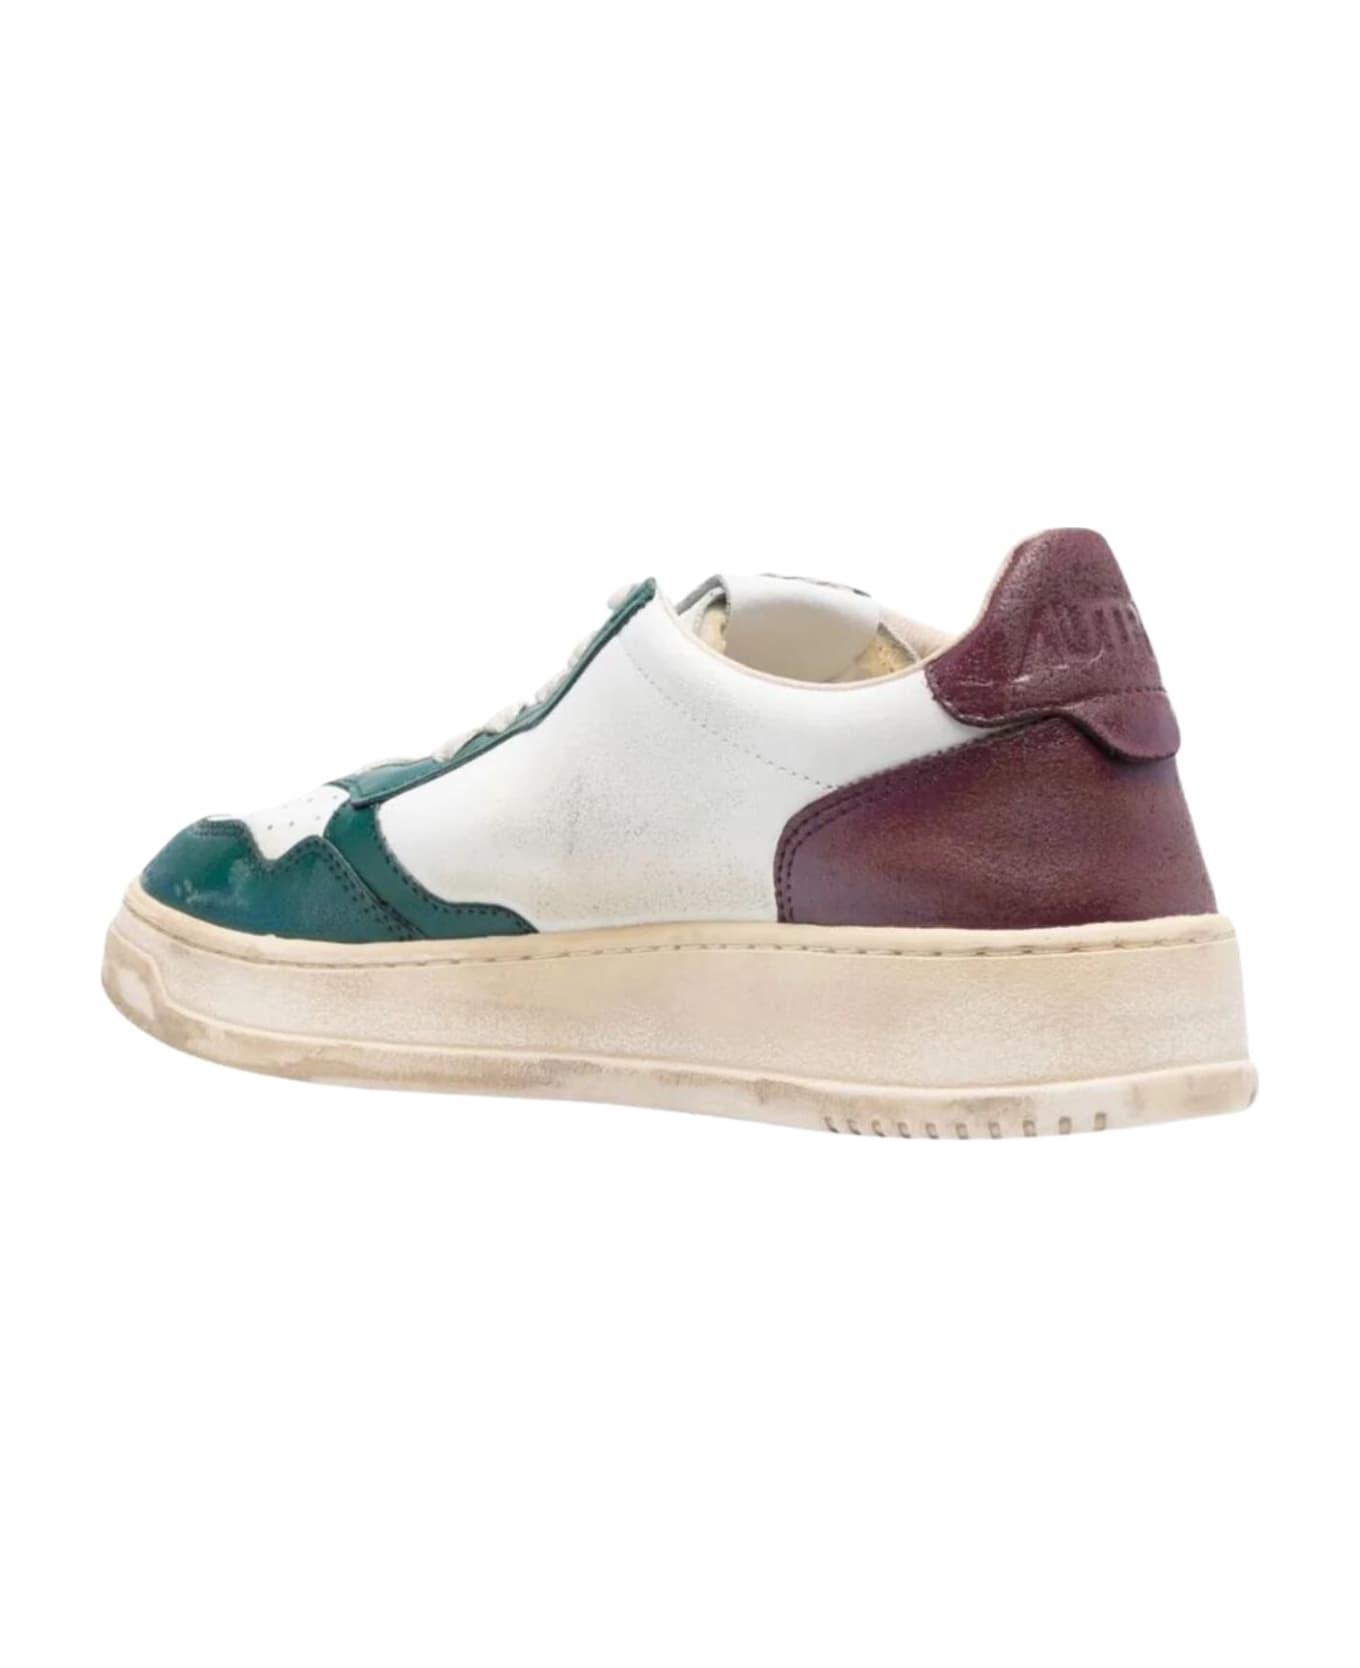 Autry Sup Vint Low Wom Sneakers - White Bordeaux Green スニーカー